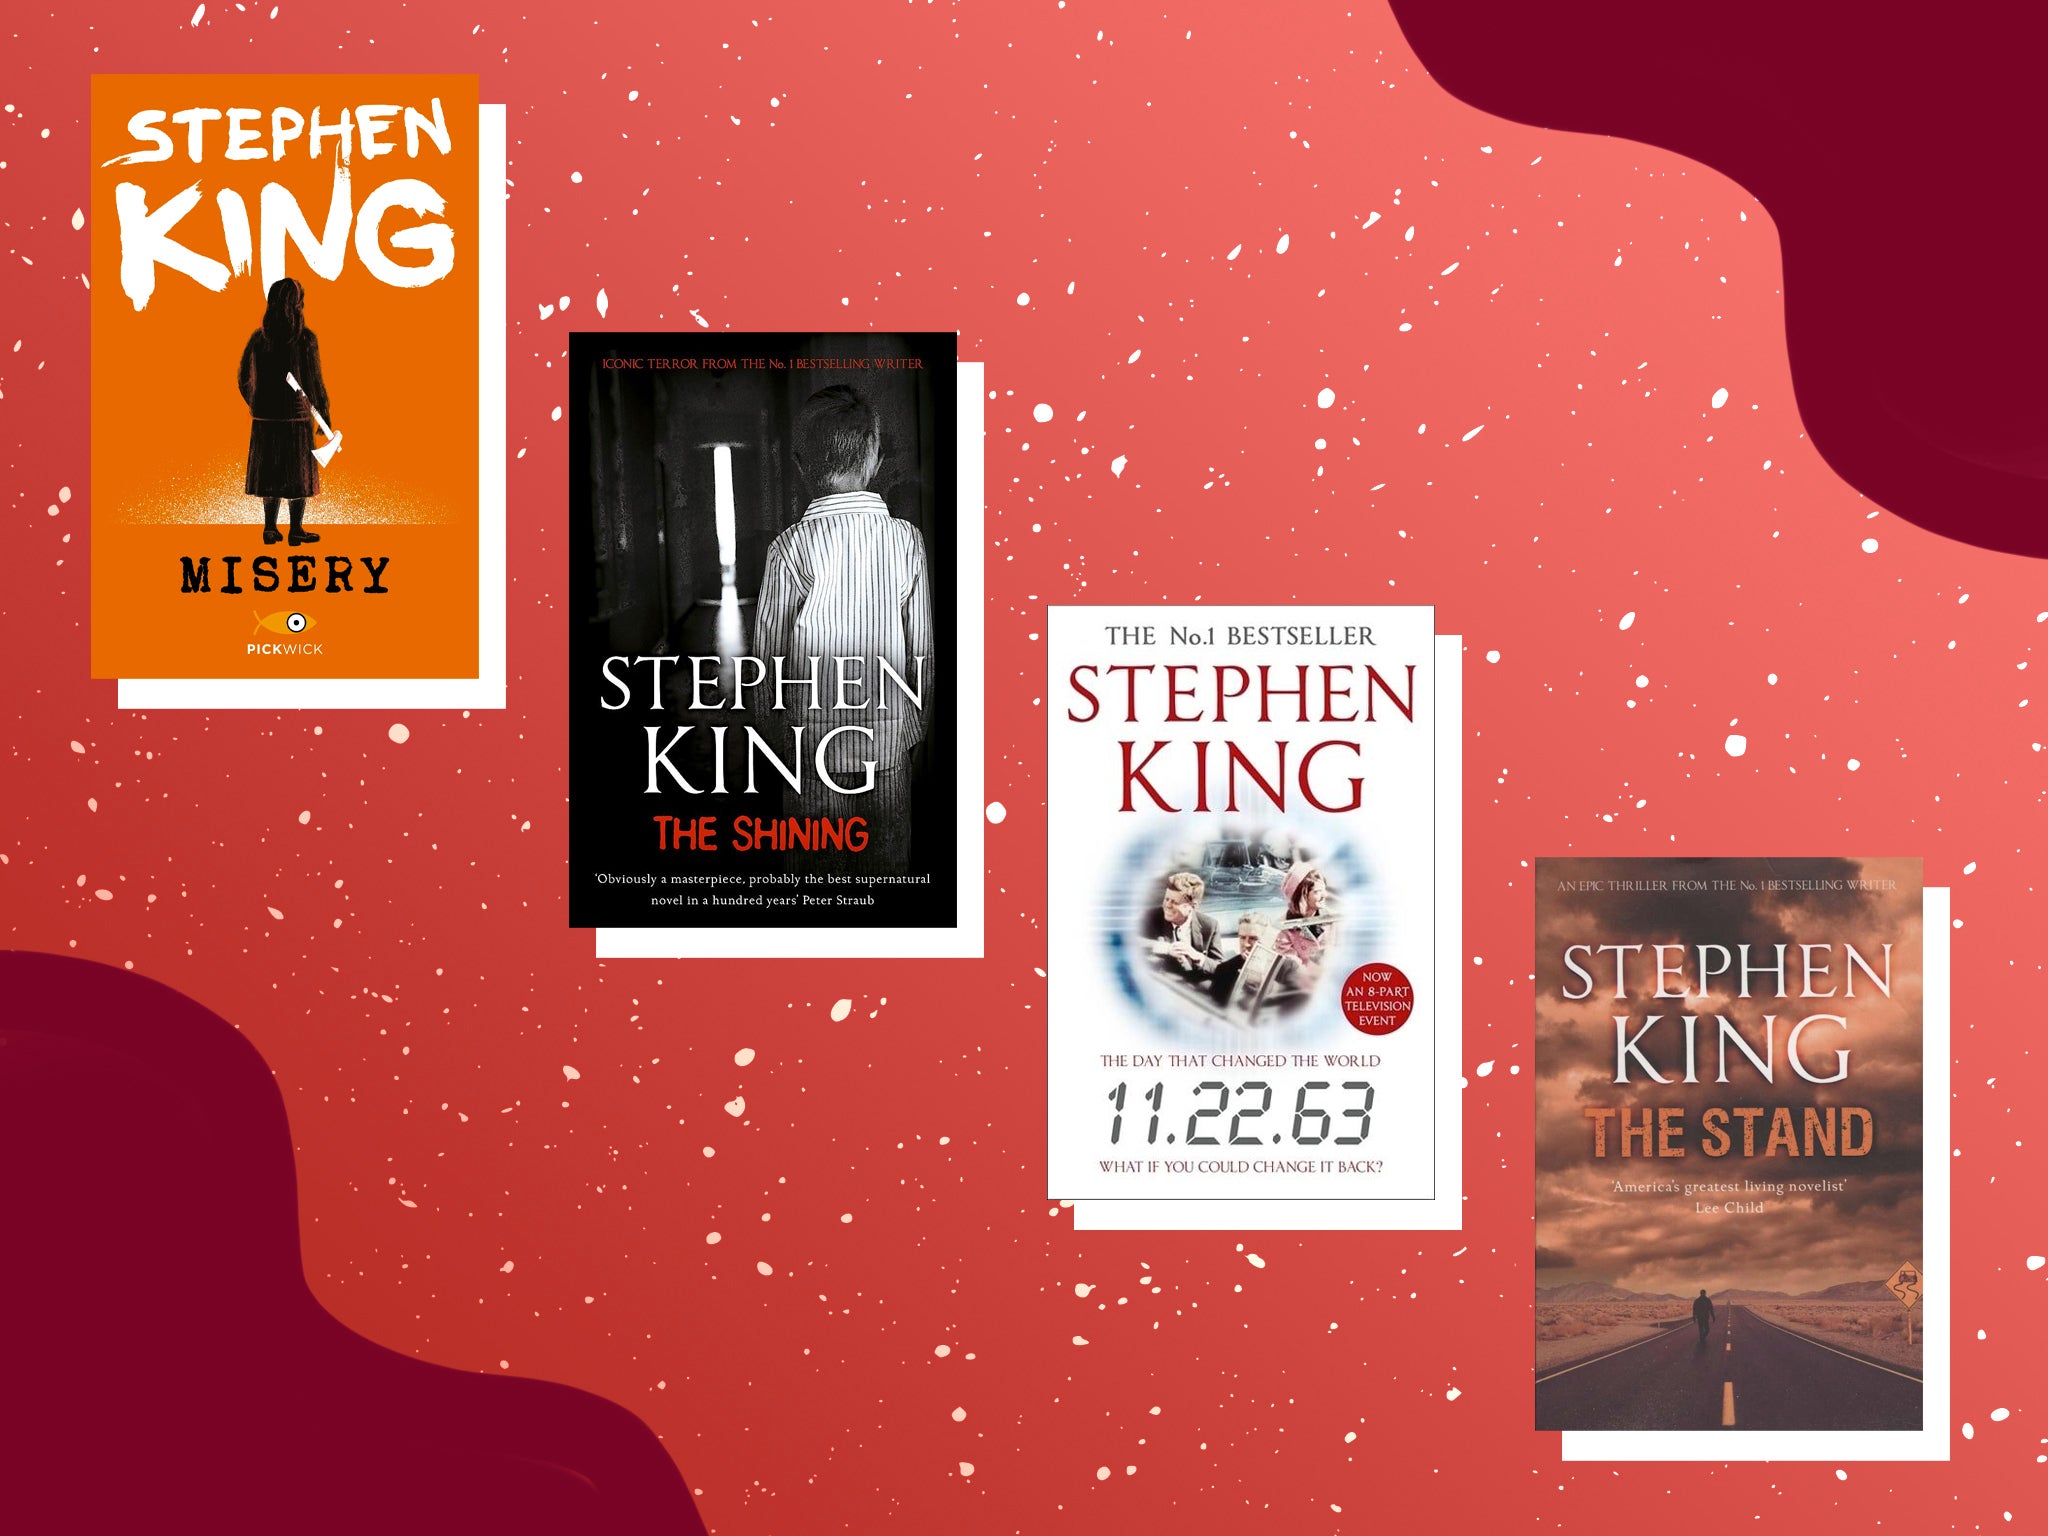 Scariest Stephen King Books, Ranked